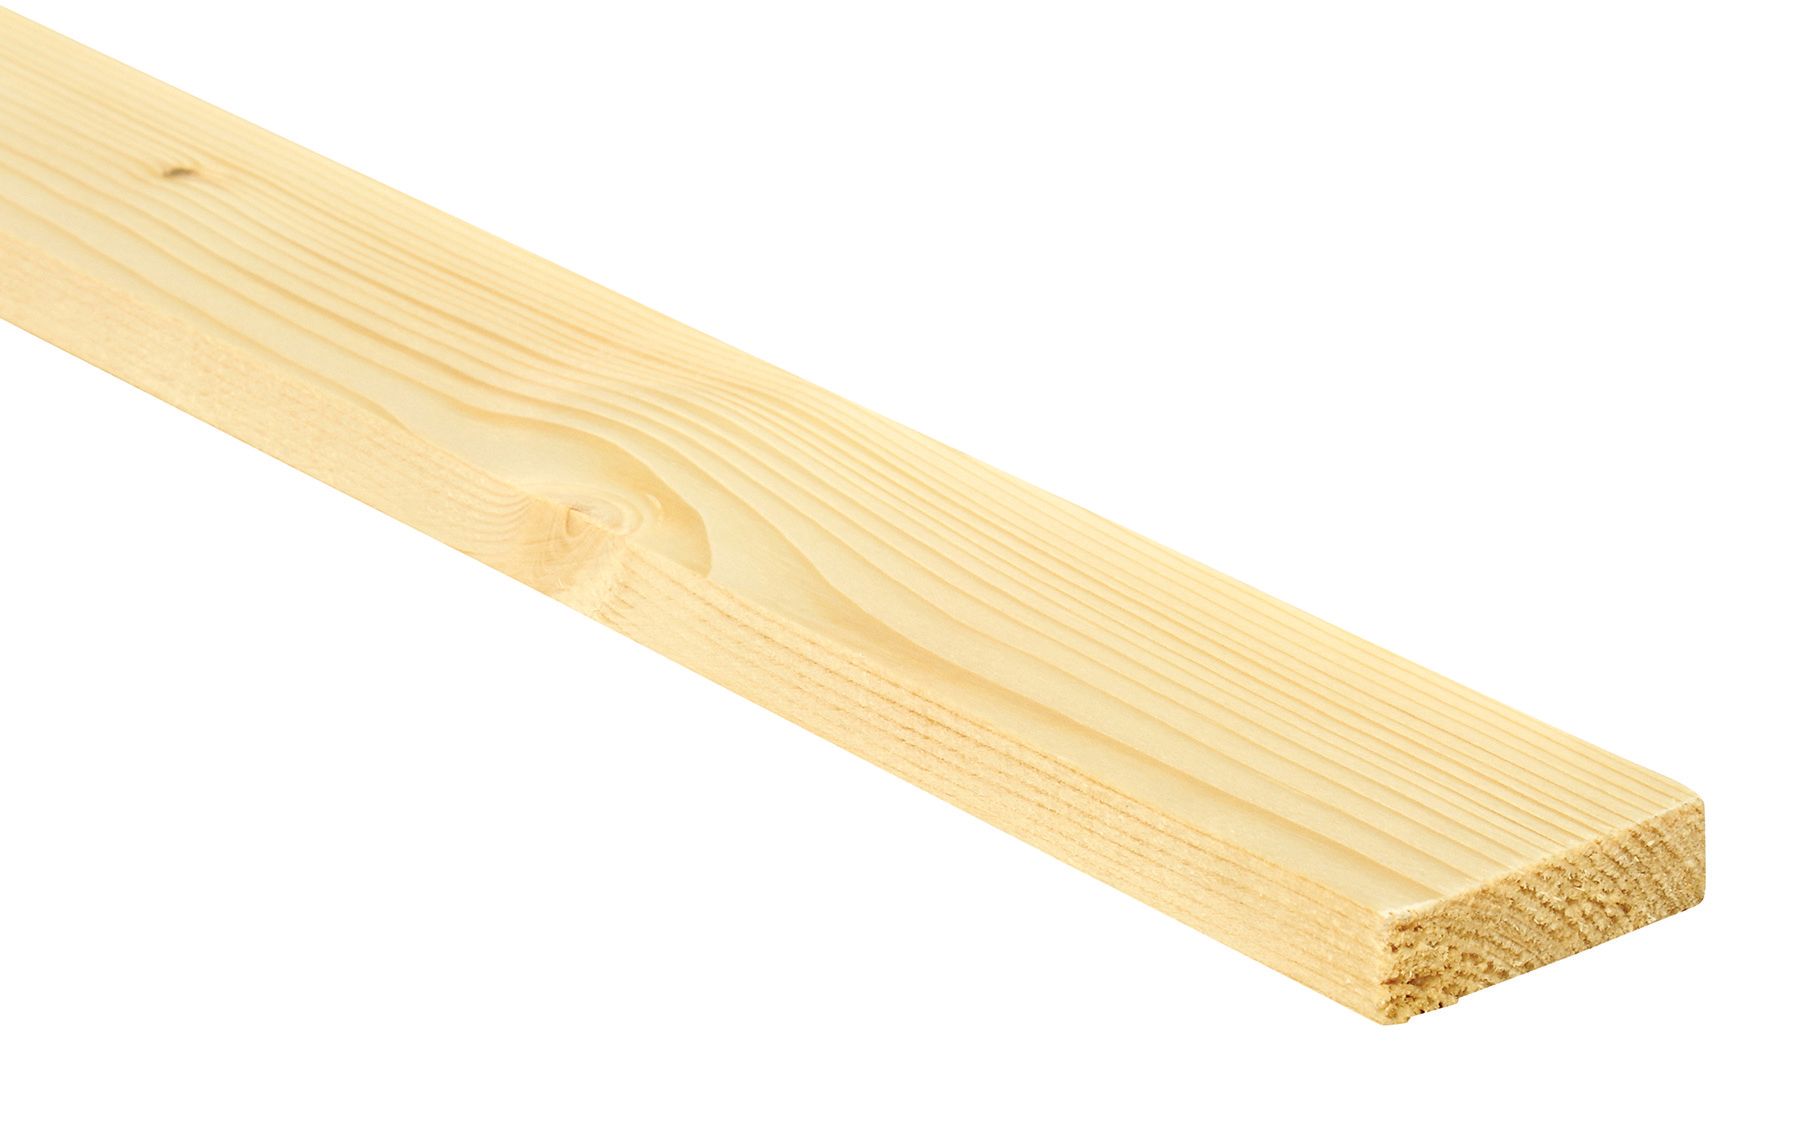 Image of Wickes Whitewood PSE Timber - 12mm x 44mm x 2400mm